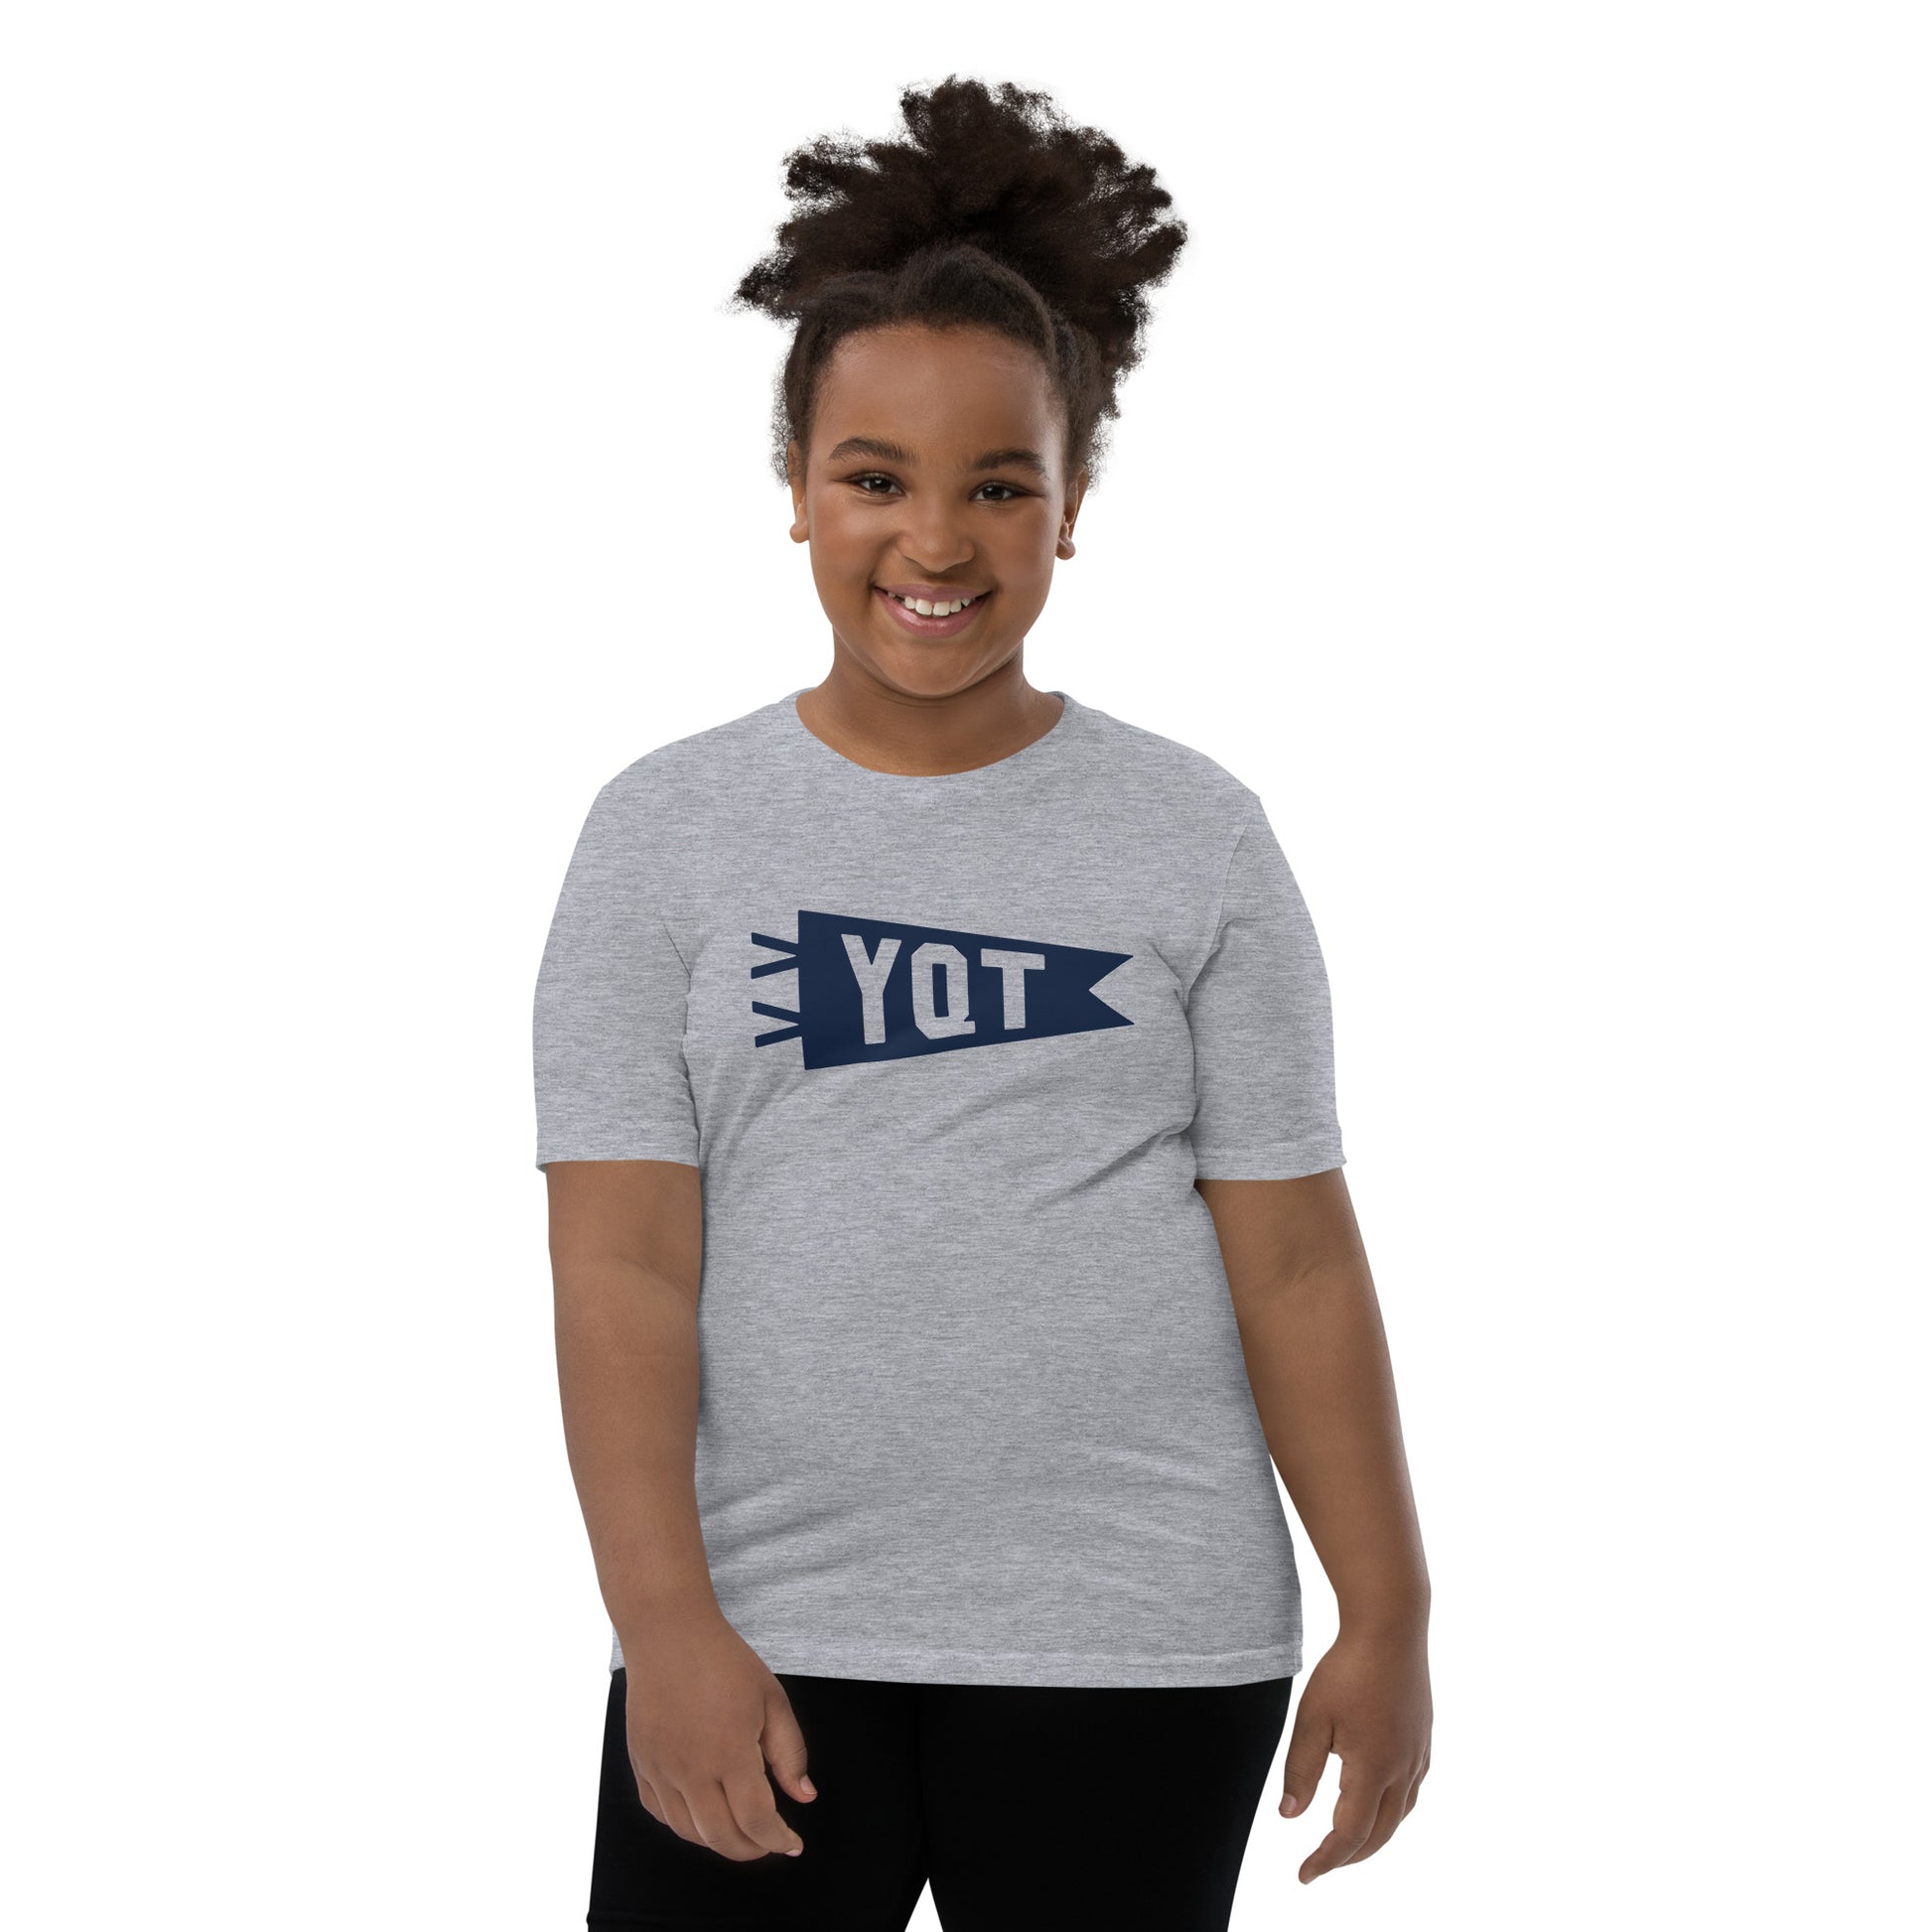 Kid's Airport Code Tee - Navy Blue Graphic • YQT Thunder Bay • YHM Designs - Image 05